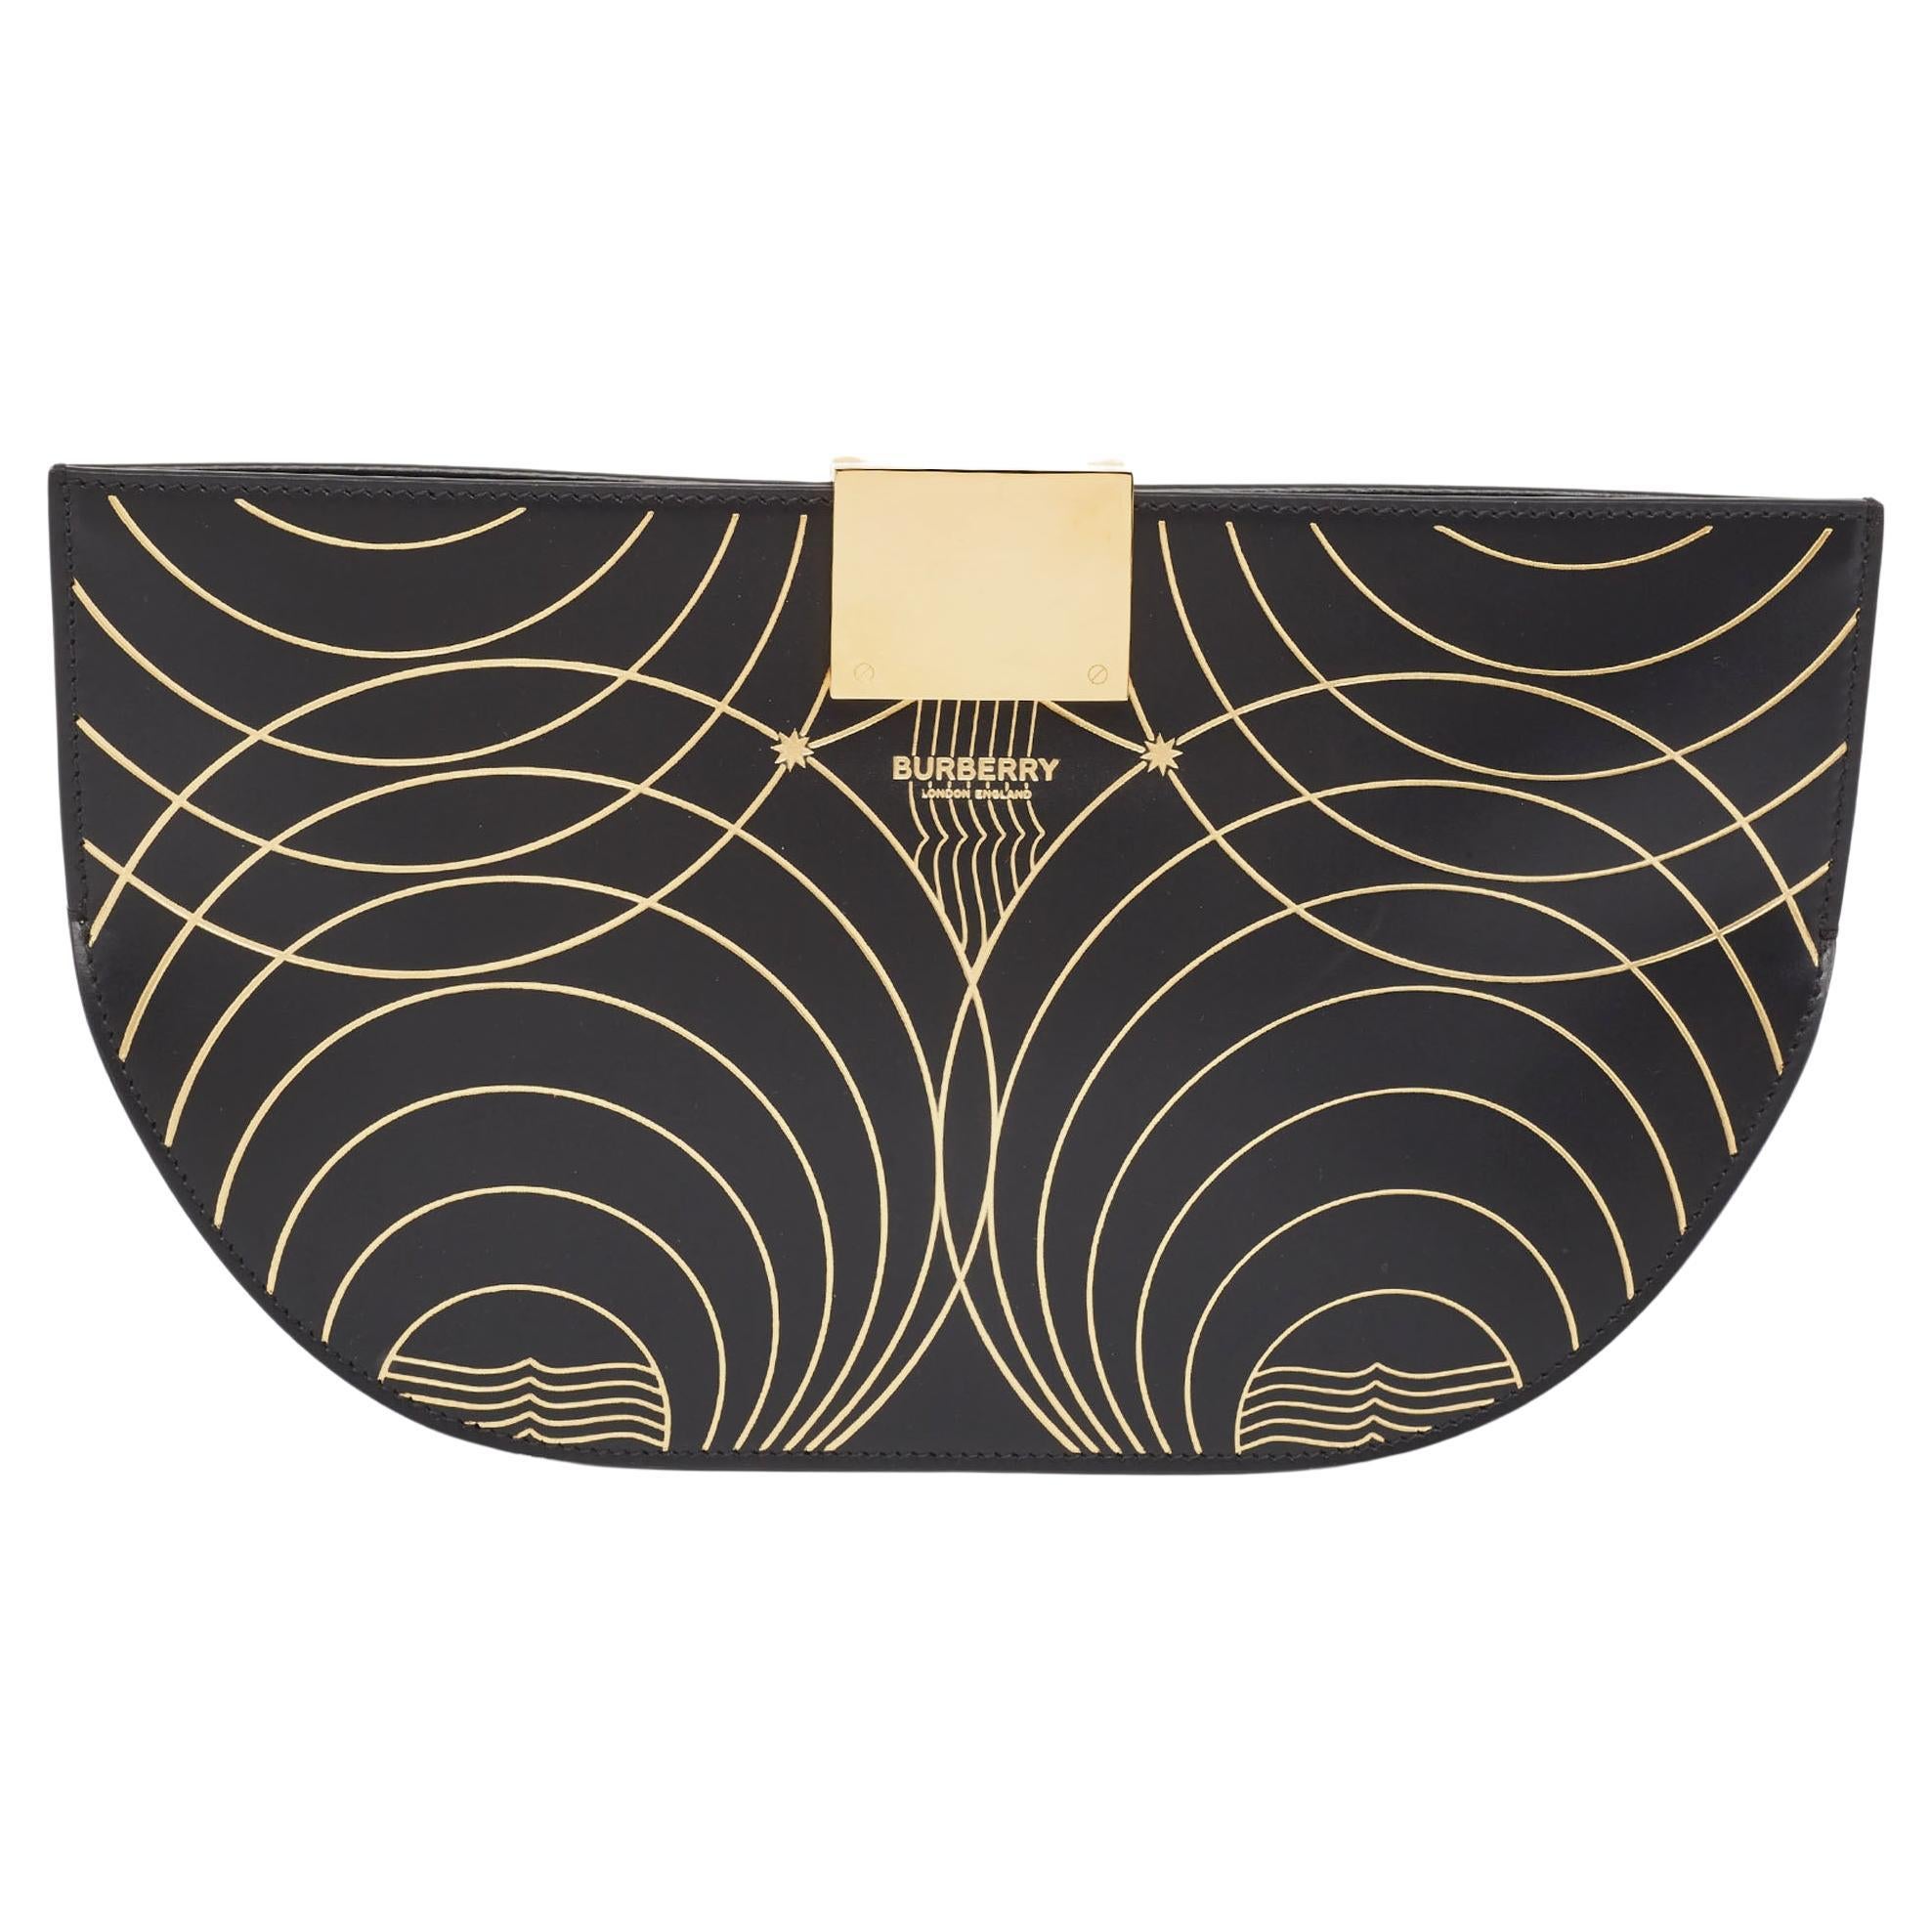 Burberry Black/Gold Printed Leather Olympia Wristlet Clutch For Sale